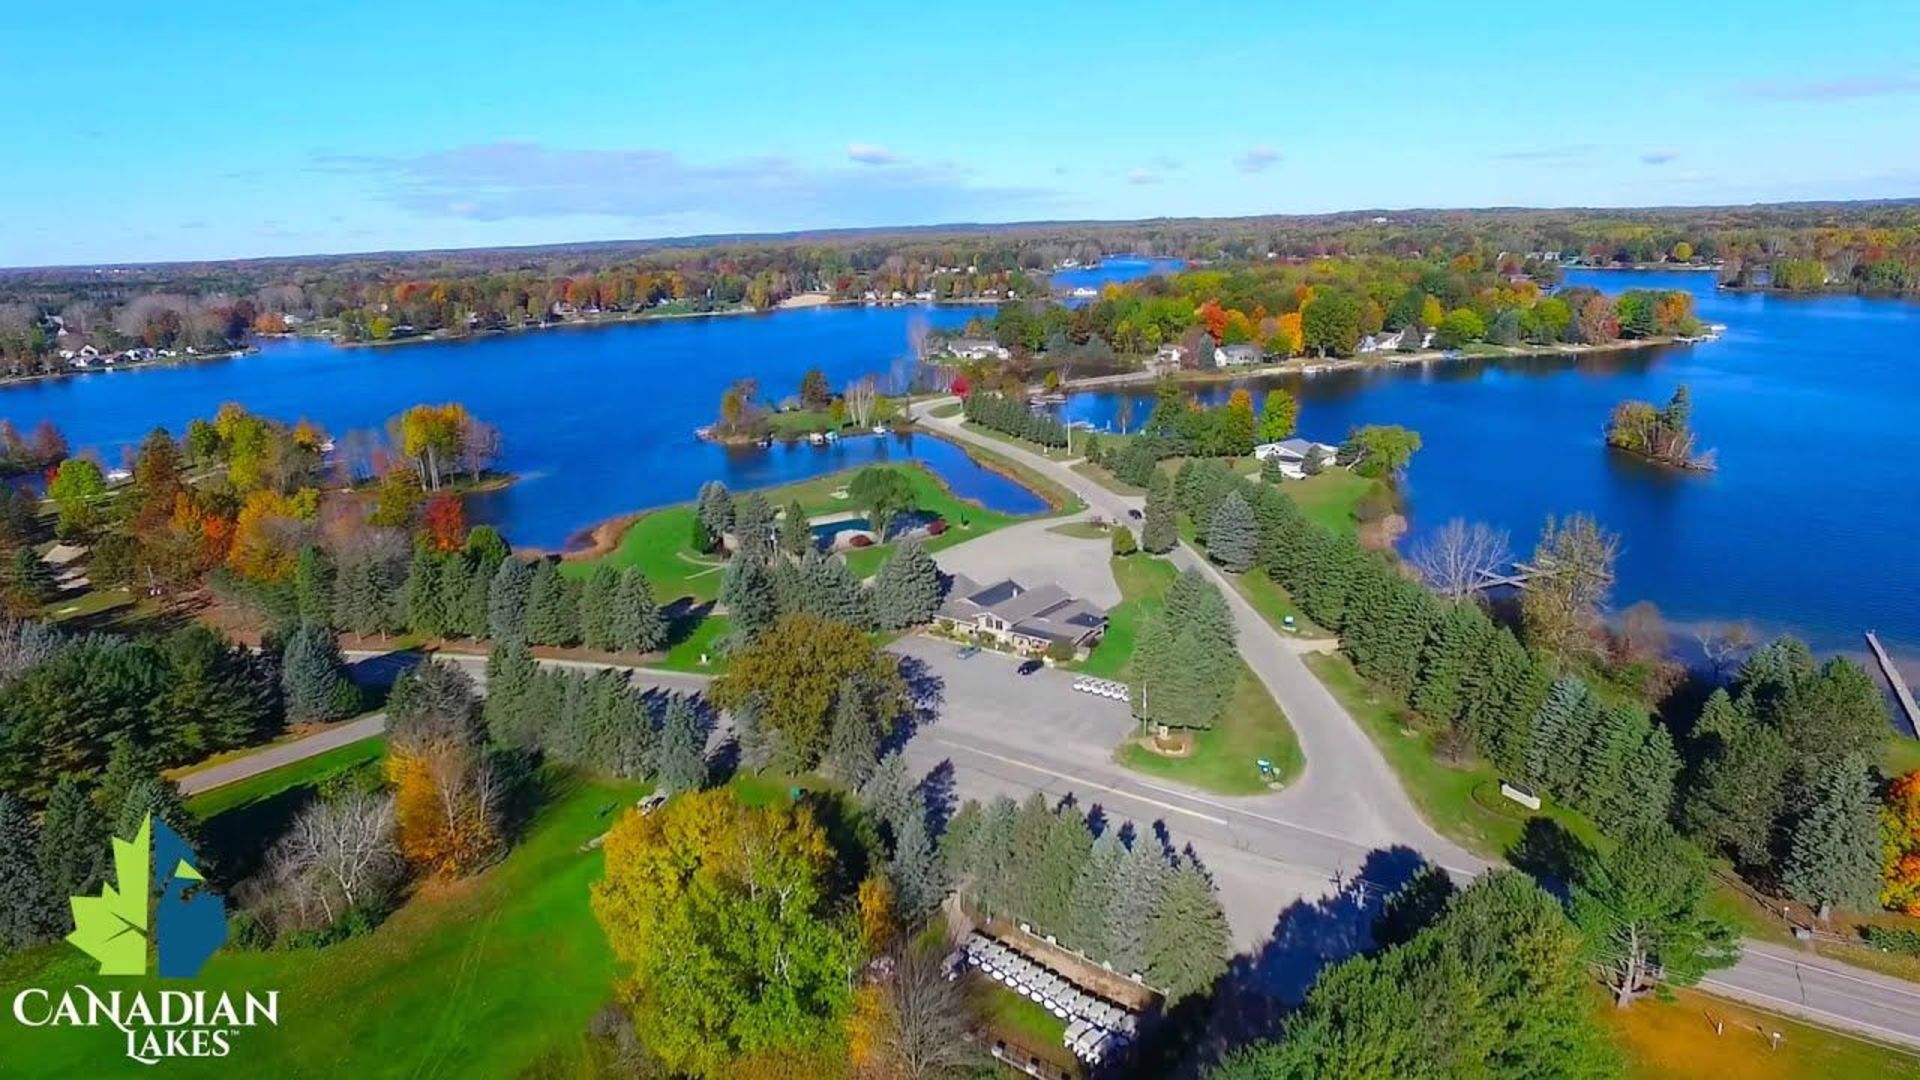 Build Your Dream Home in Canadian Lakes, Michigan! - Image 2 of 15